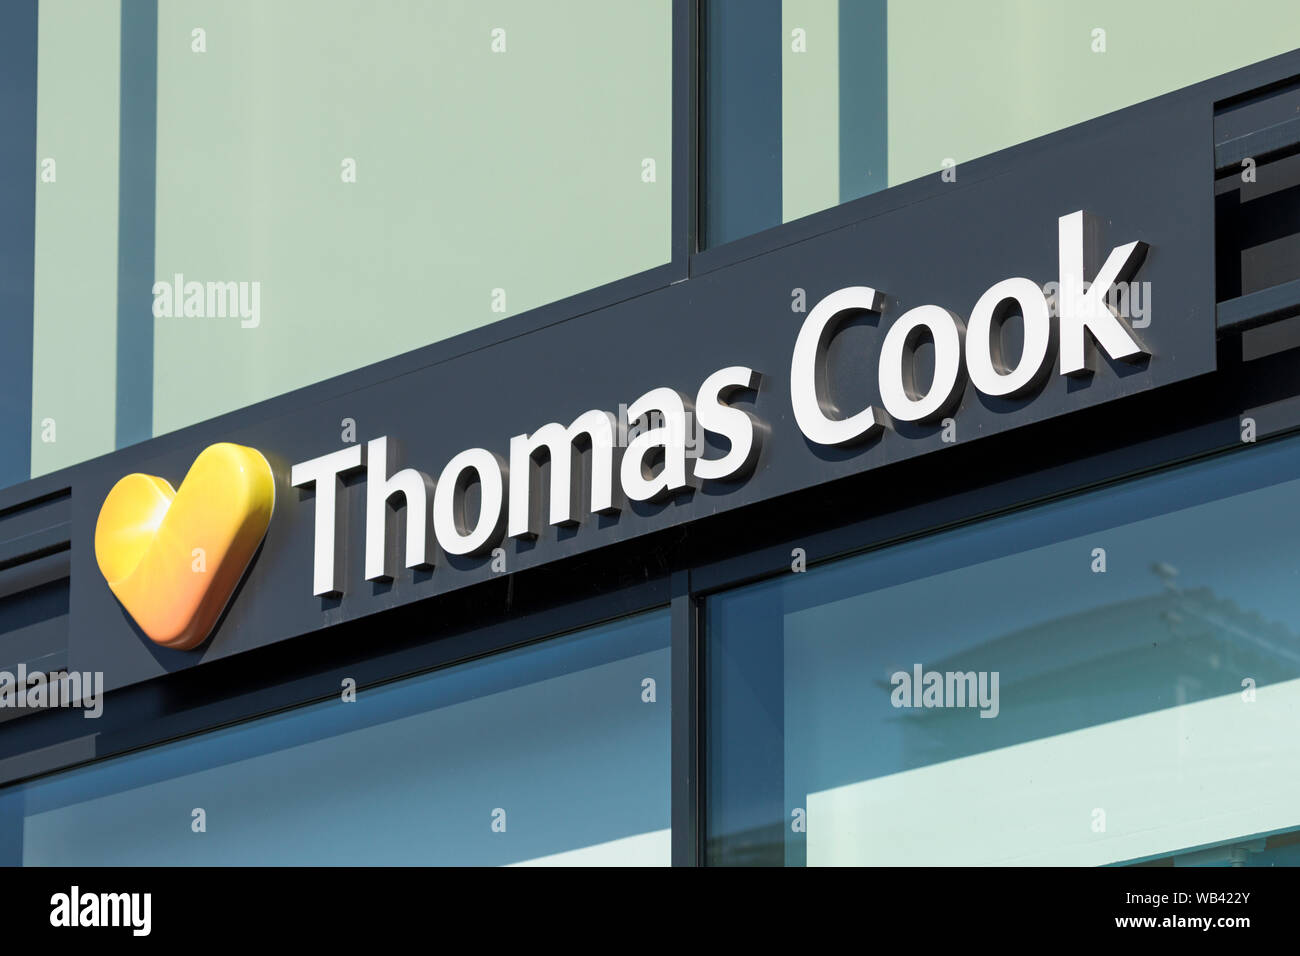 Stade, Germany - August 22, 2019: Signage identifying a Thomas Cook travel agencies branch Stock Photo